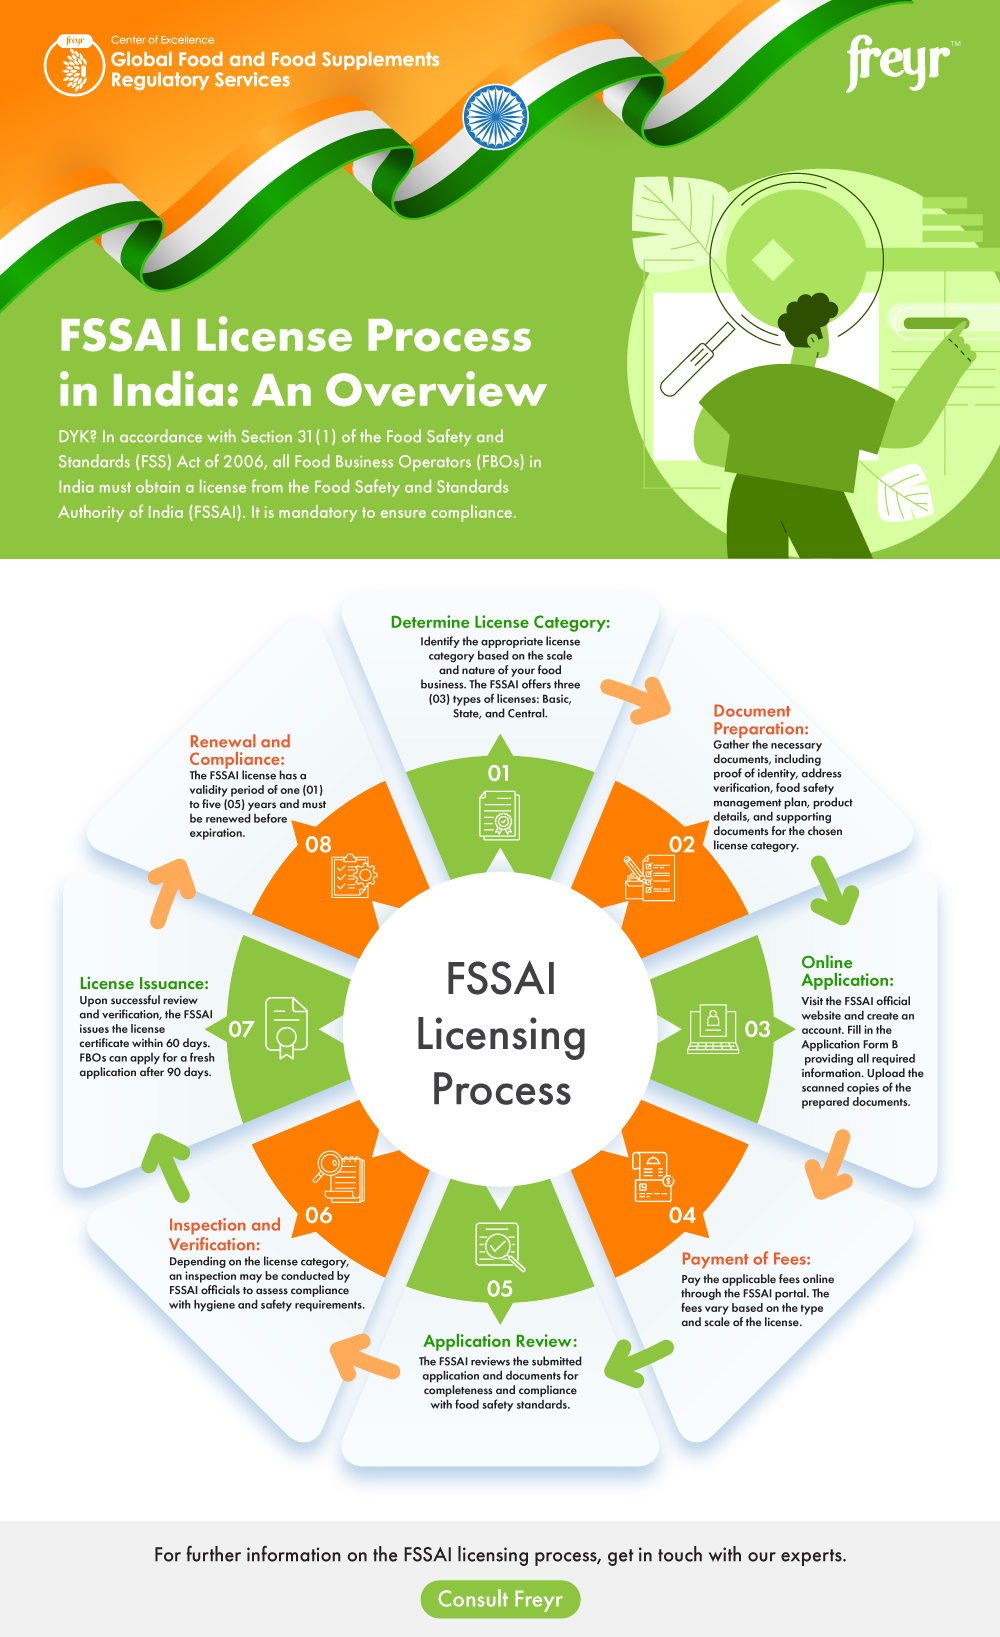 FSSAI License Process in India An Overview